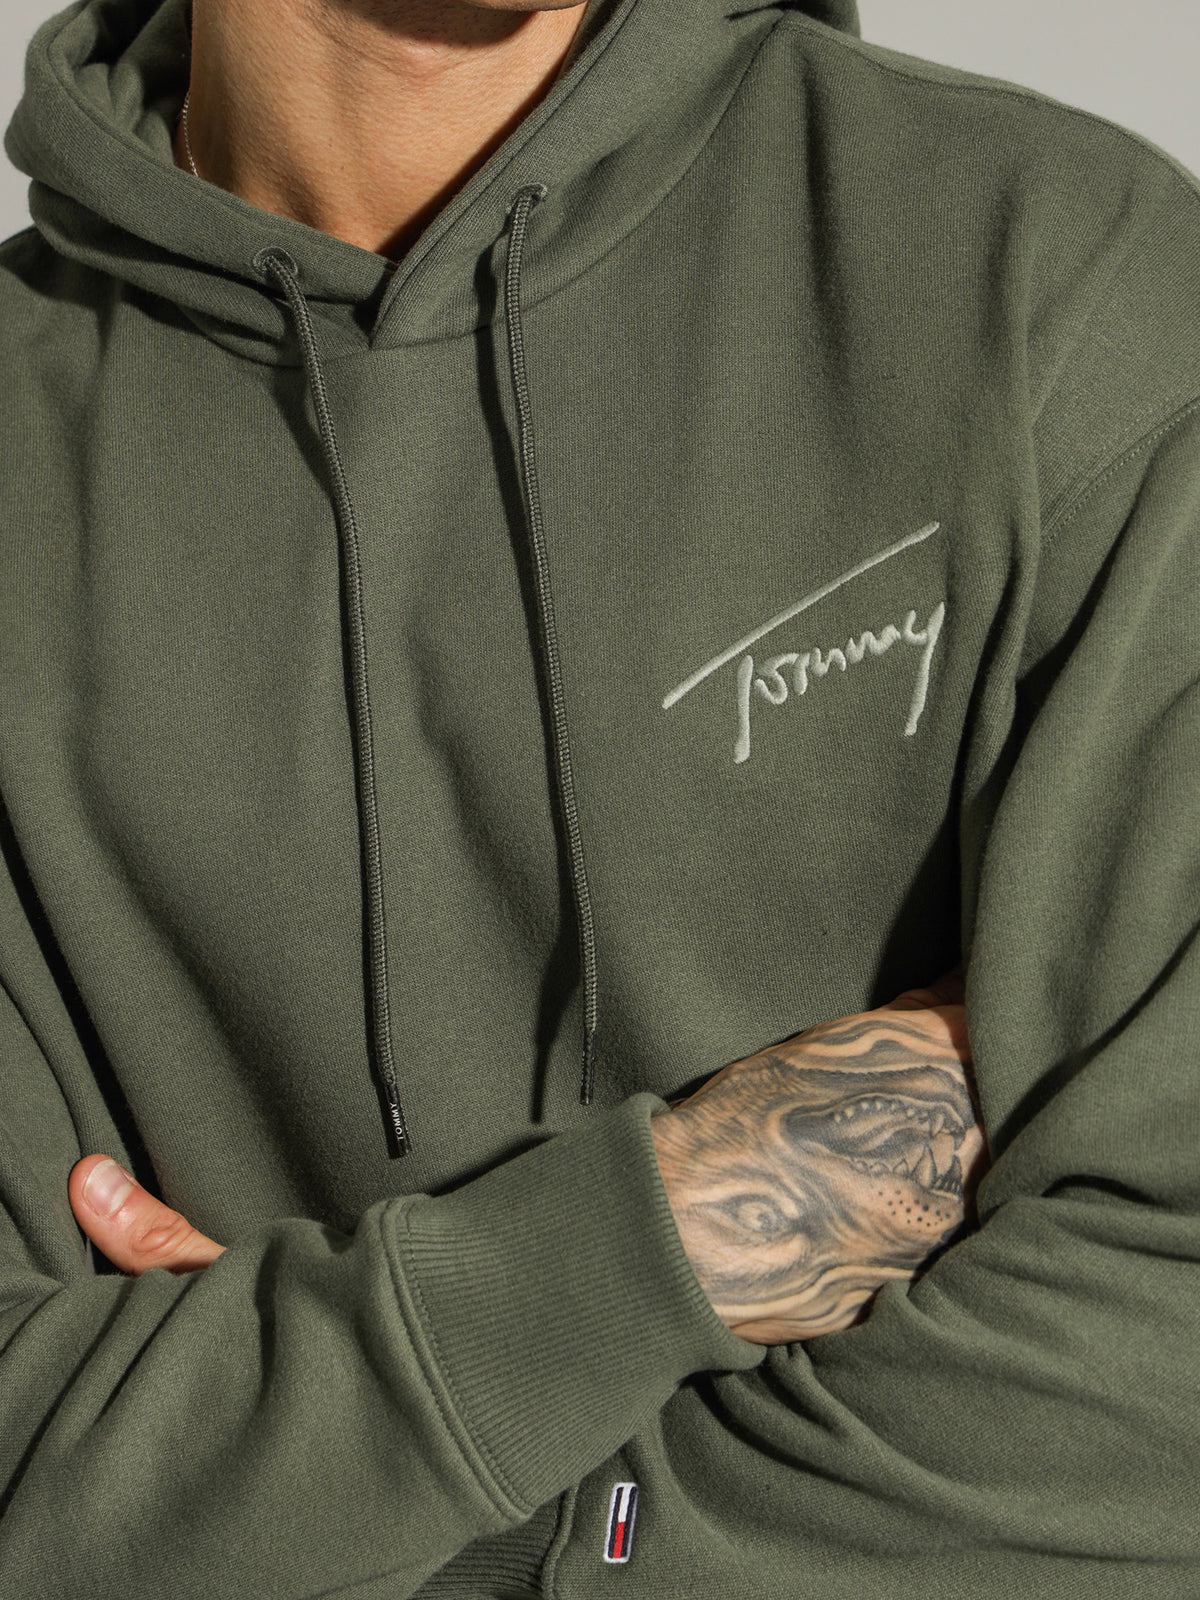 Signature Hoodie in Avalon Green